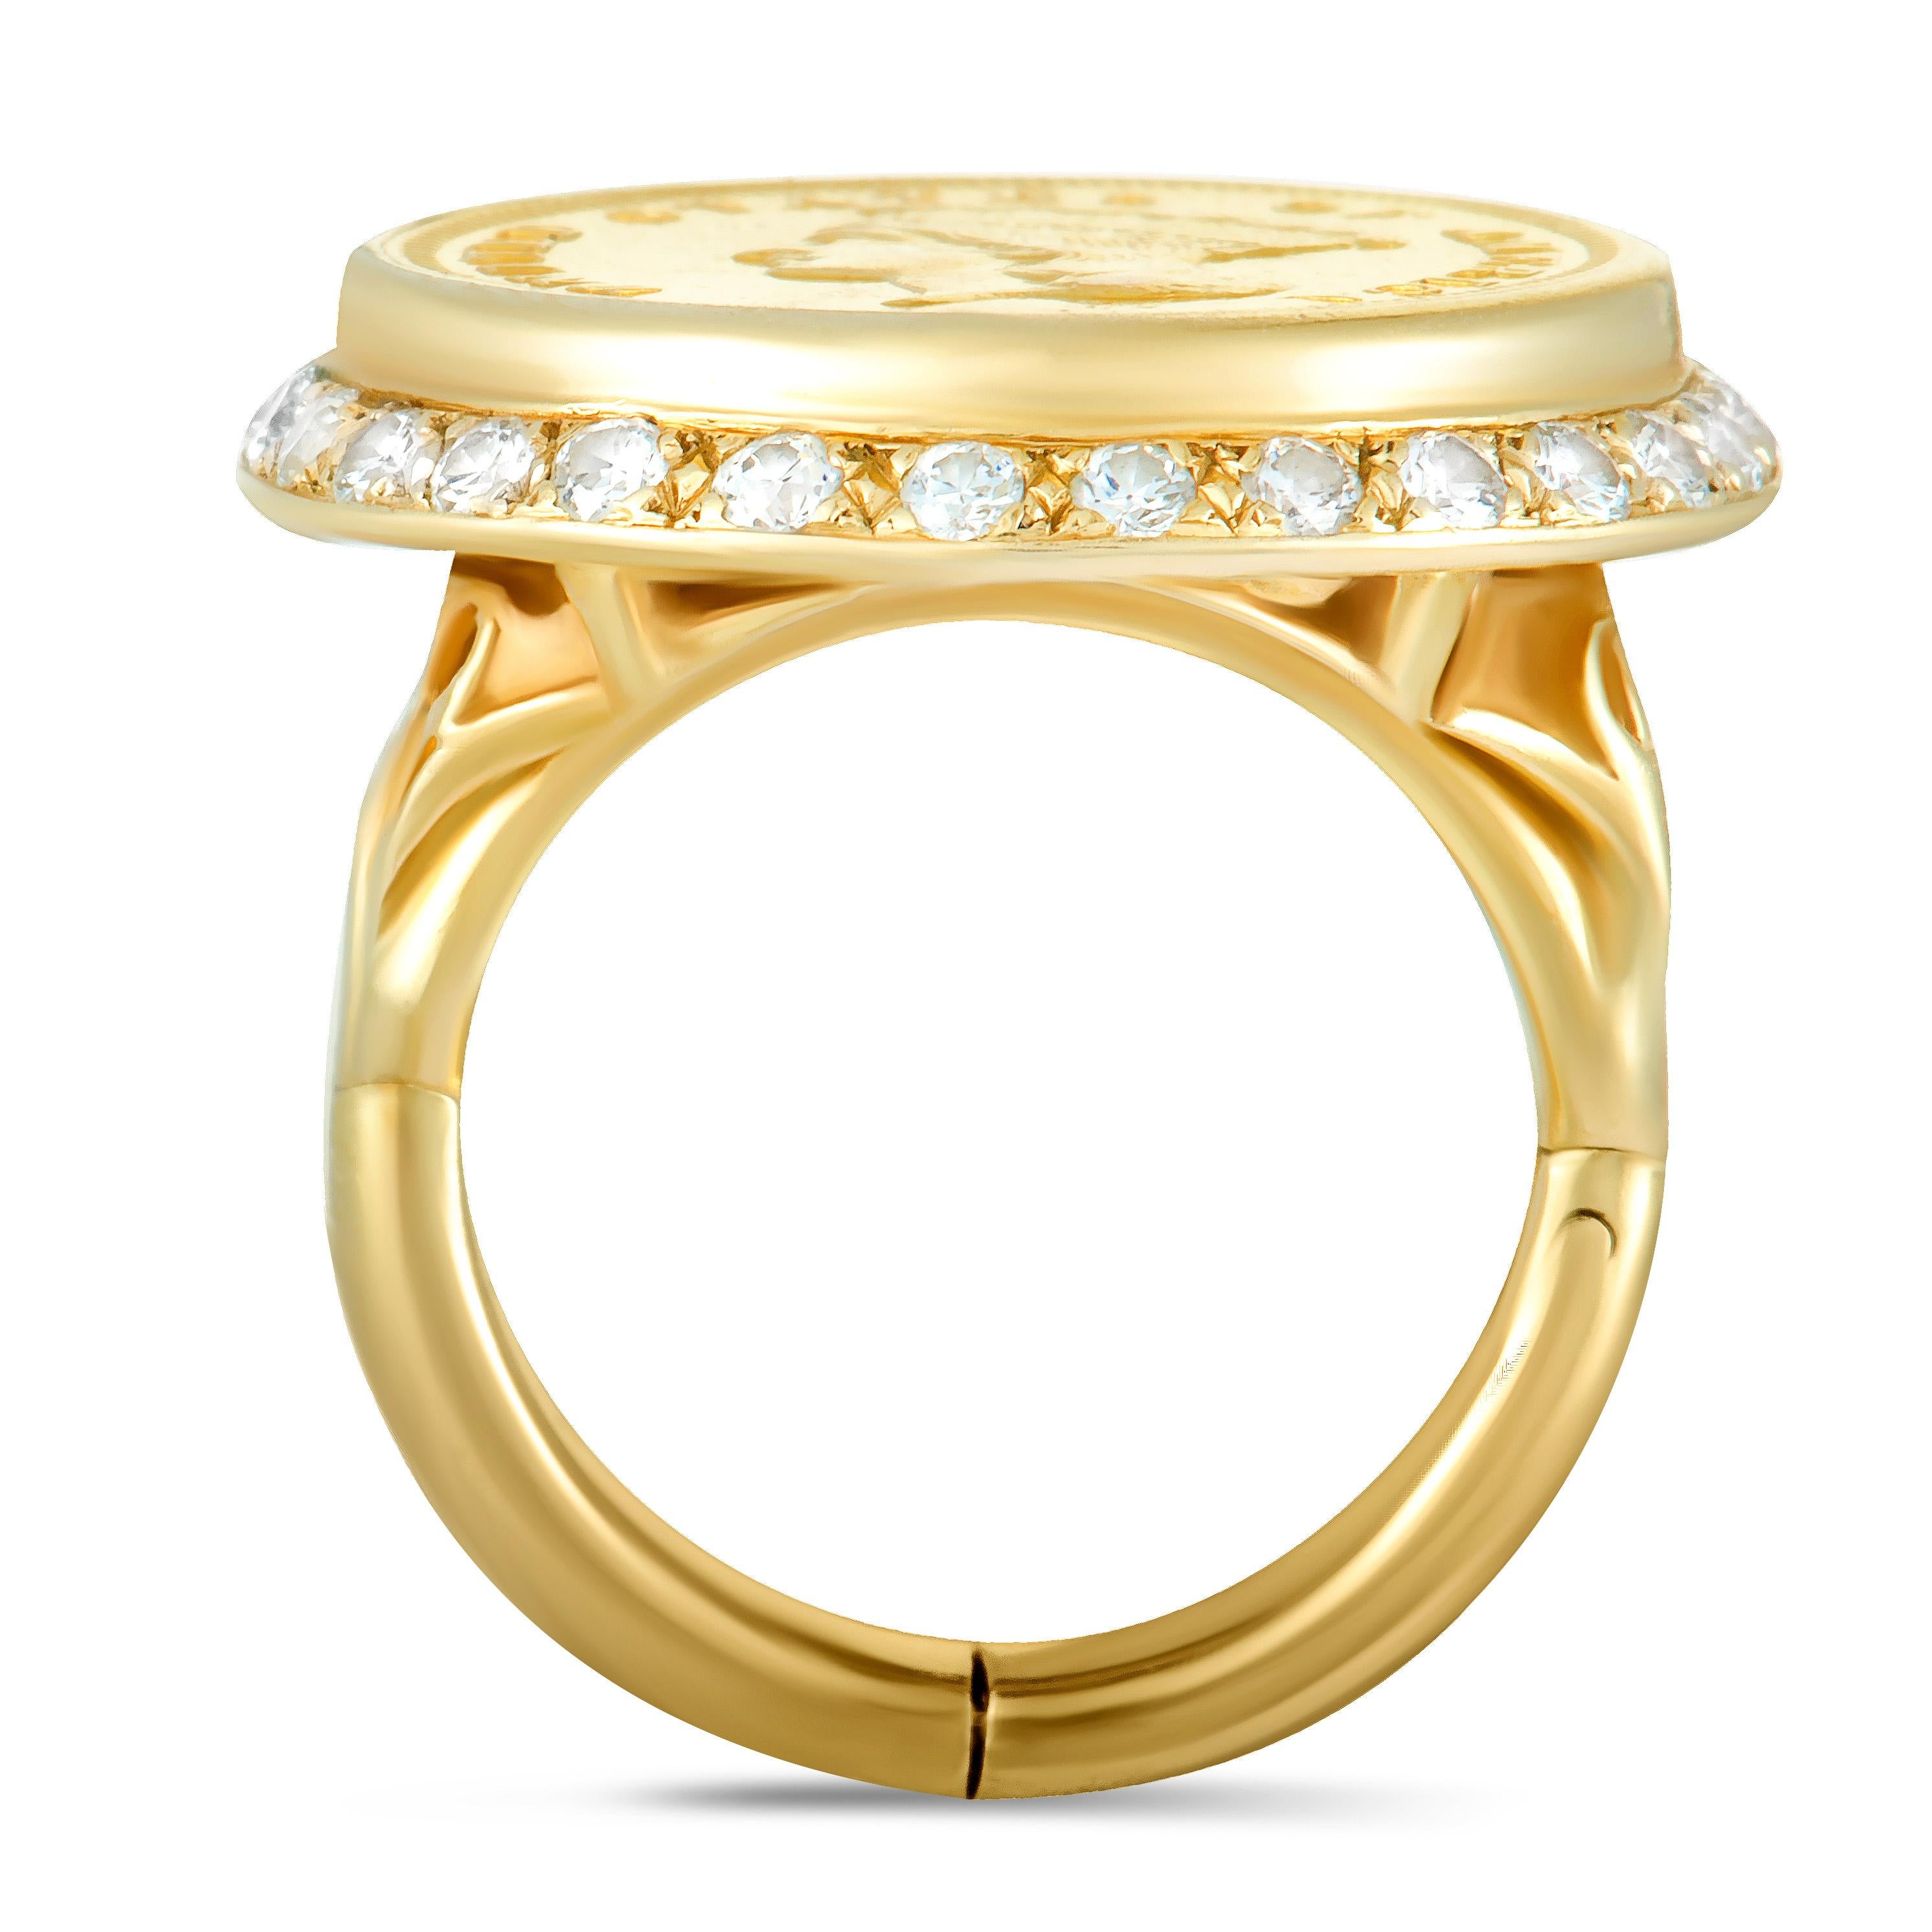 If you wish to embellish your look in a distinctly unconventional fashion then this antique jewelry piece is an excellent choice. Combining the alluring radiance of 18K and 22K yellow gold, the ring boasts a striking coin that is accentuated by a